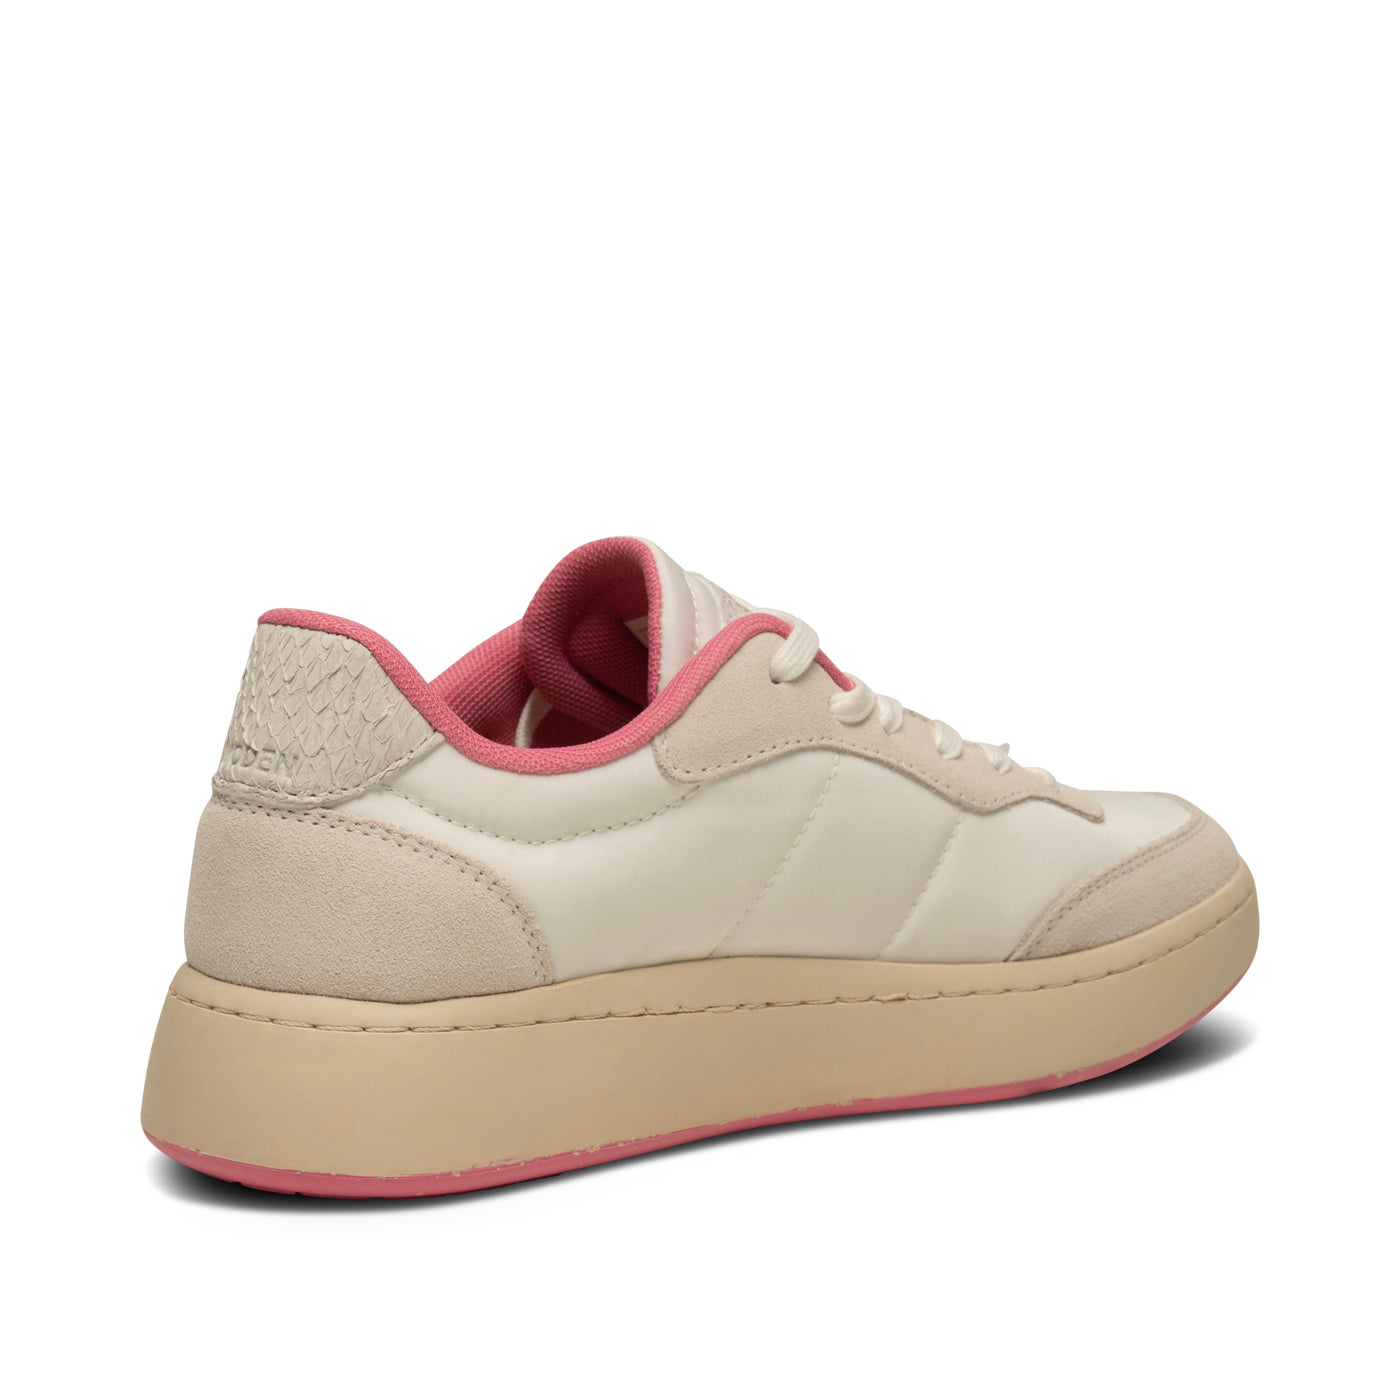 WODEN May Sneakers 133 Ivory/Aurora Pink